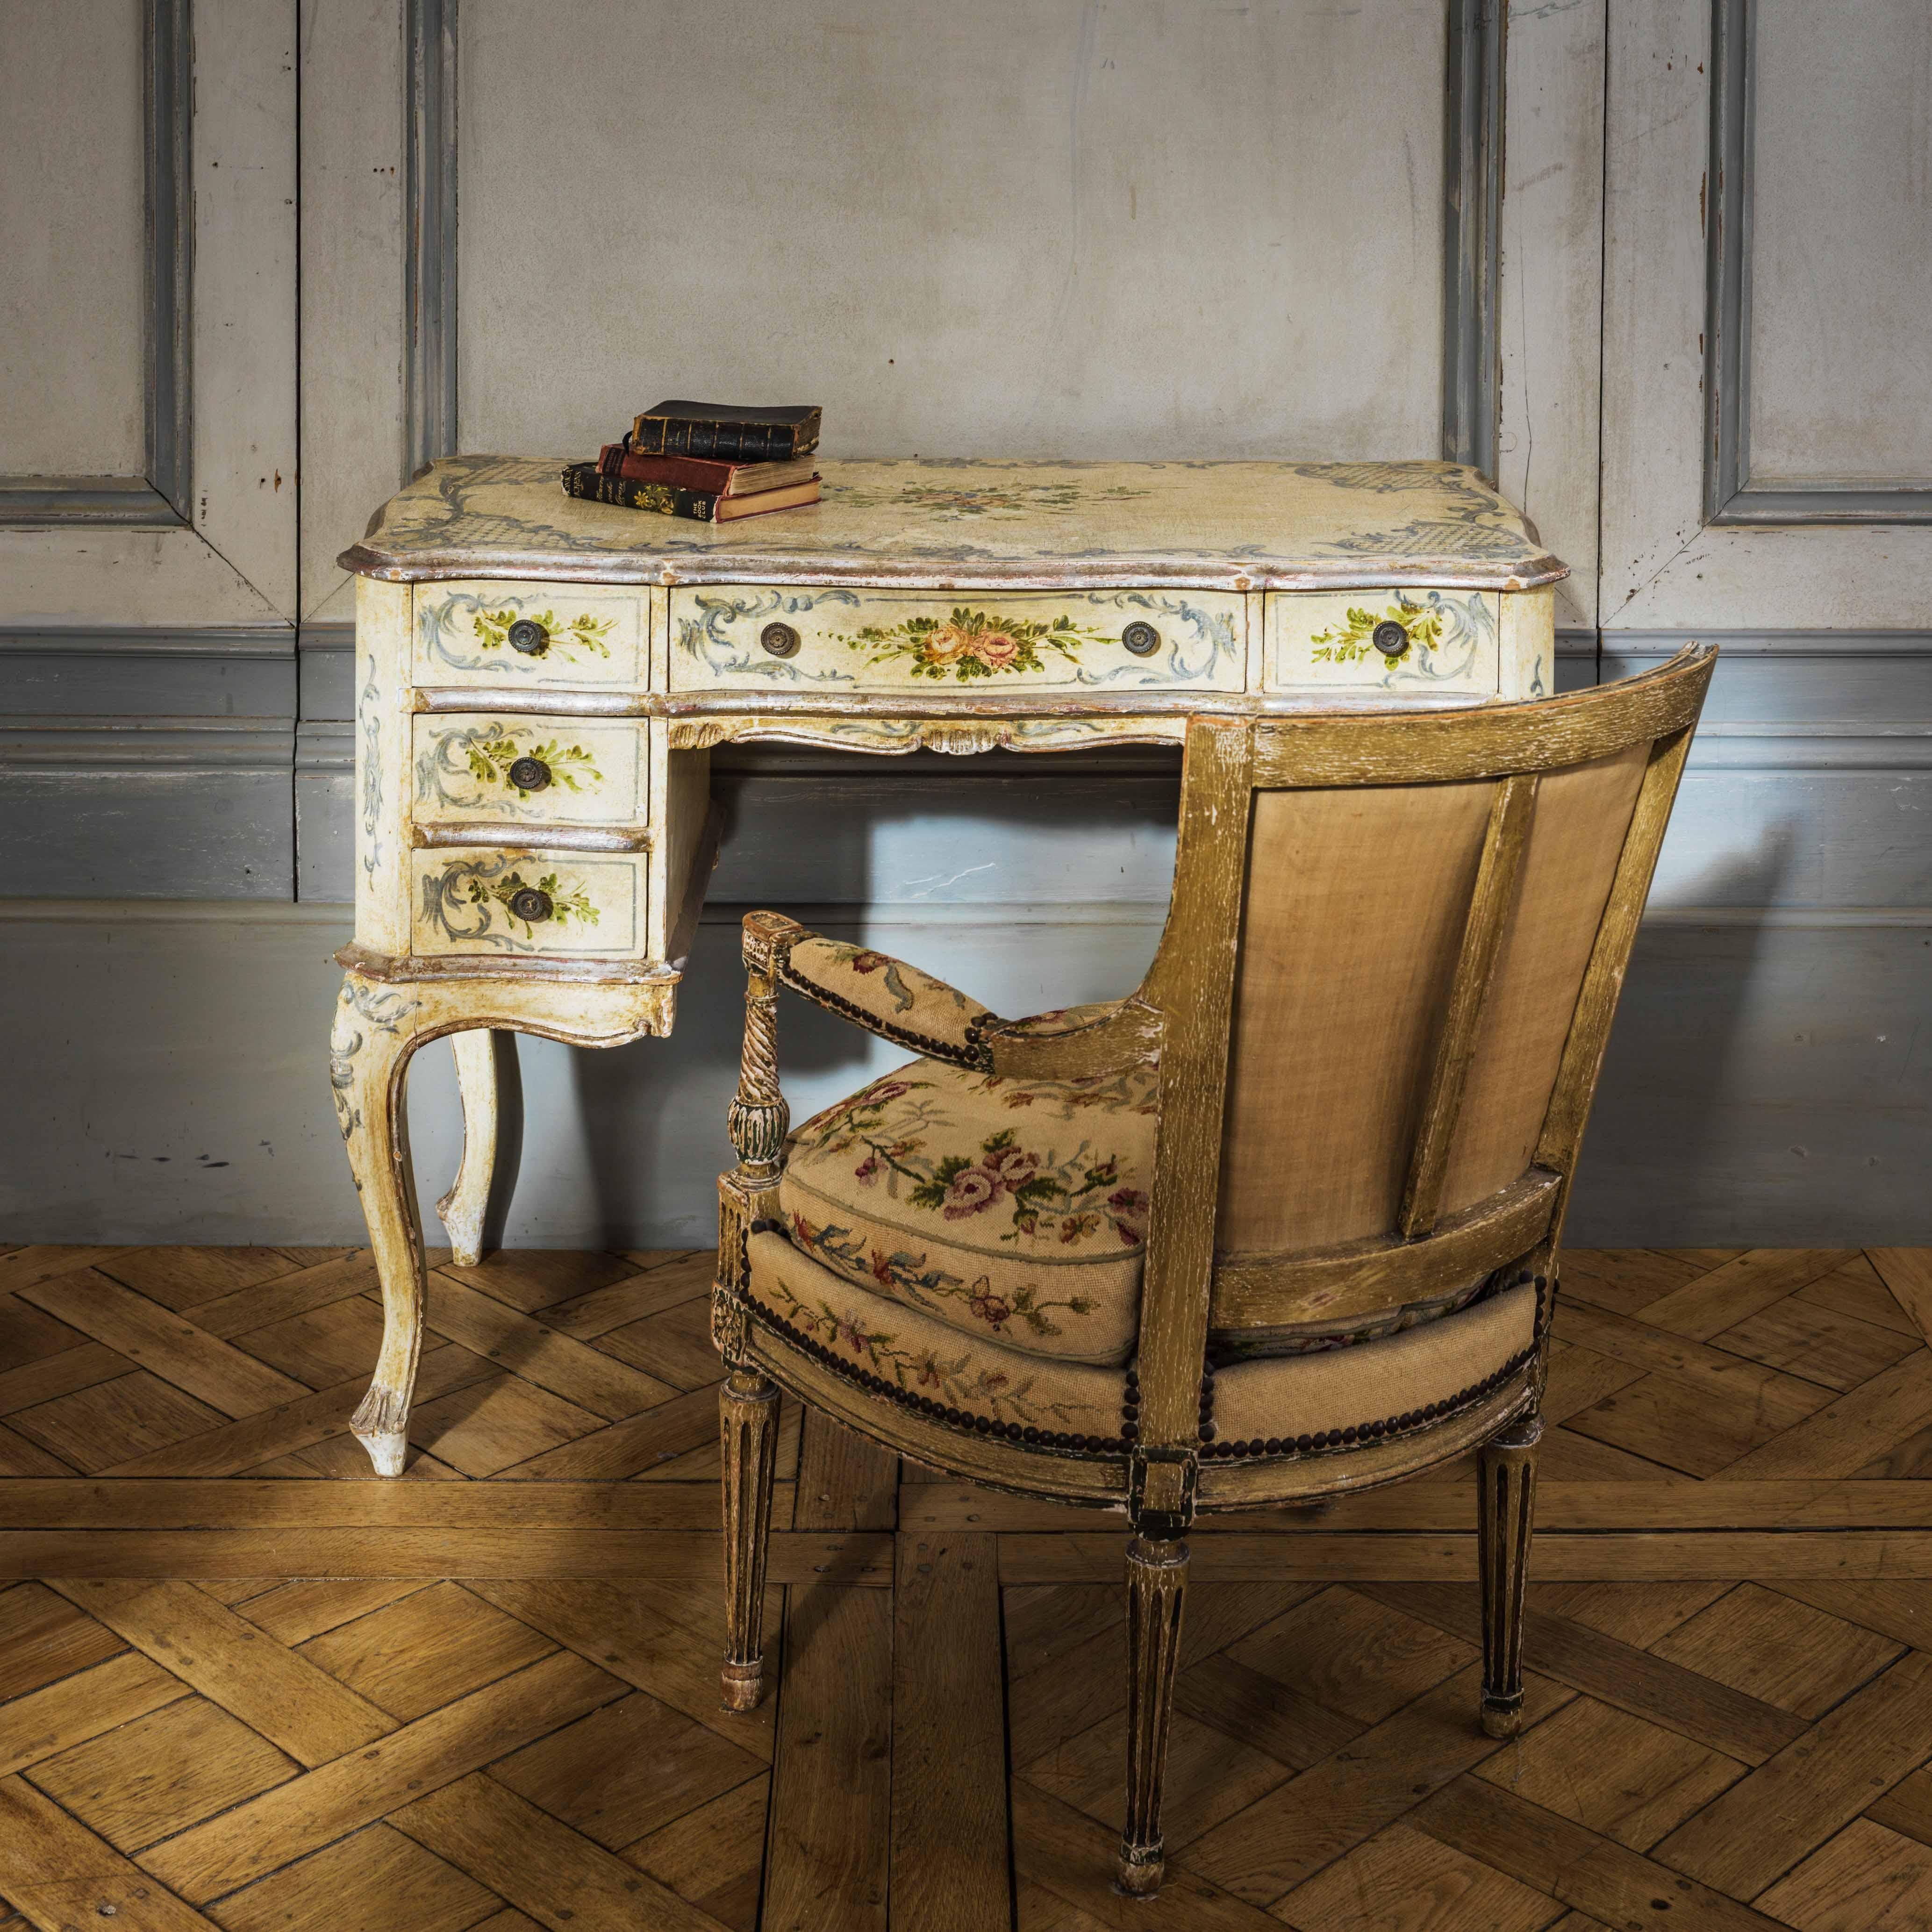 A charming, hand-painted, Louis XV style, Italian writing desk or dressing table from the early 20th century depicting floral motifs with Rococo flourishes and gilded highlighting.